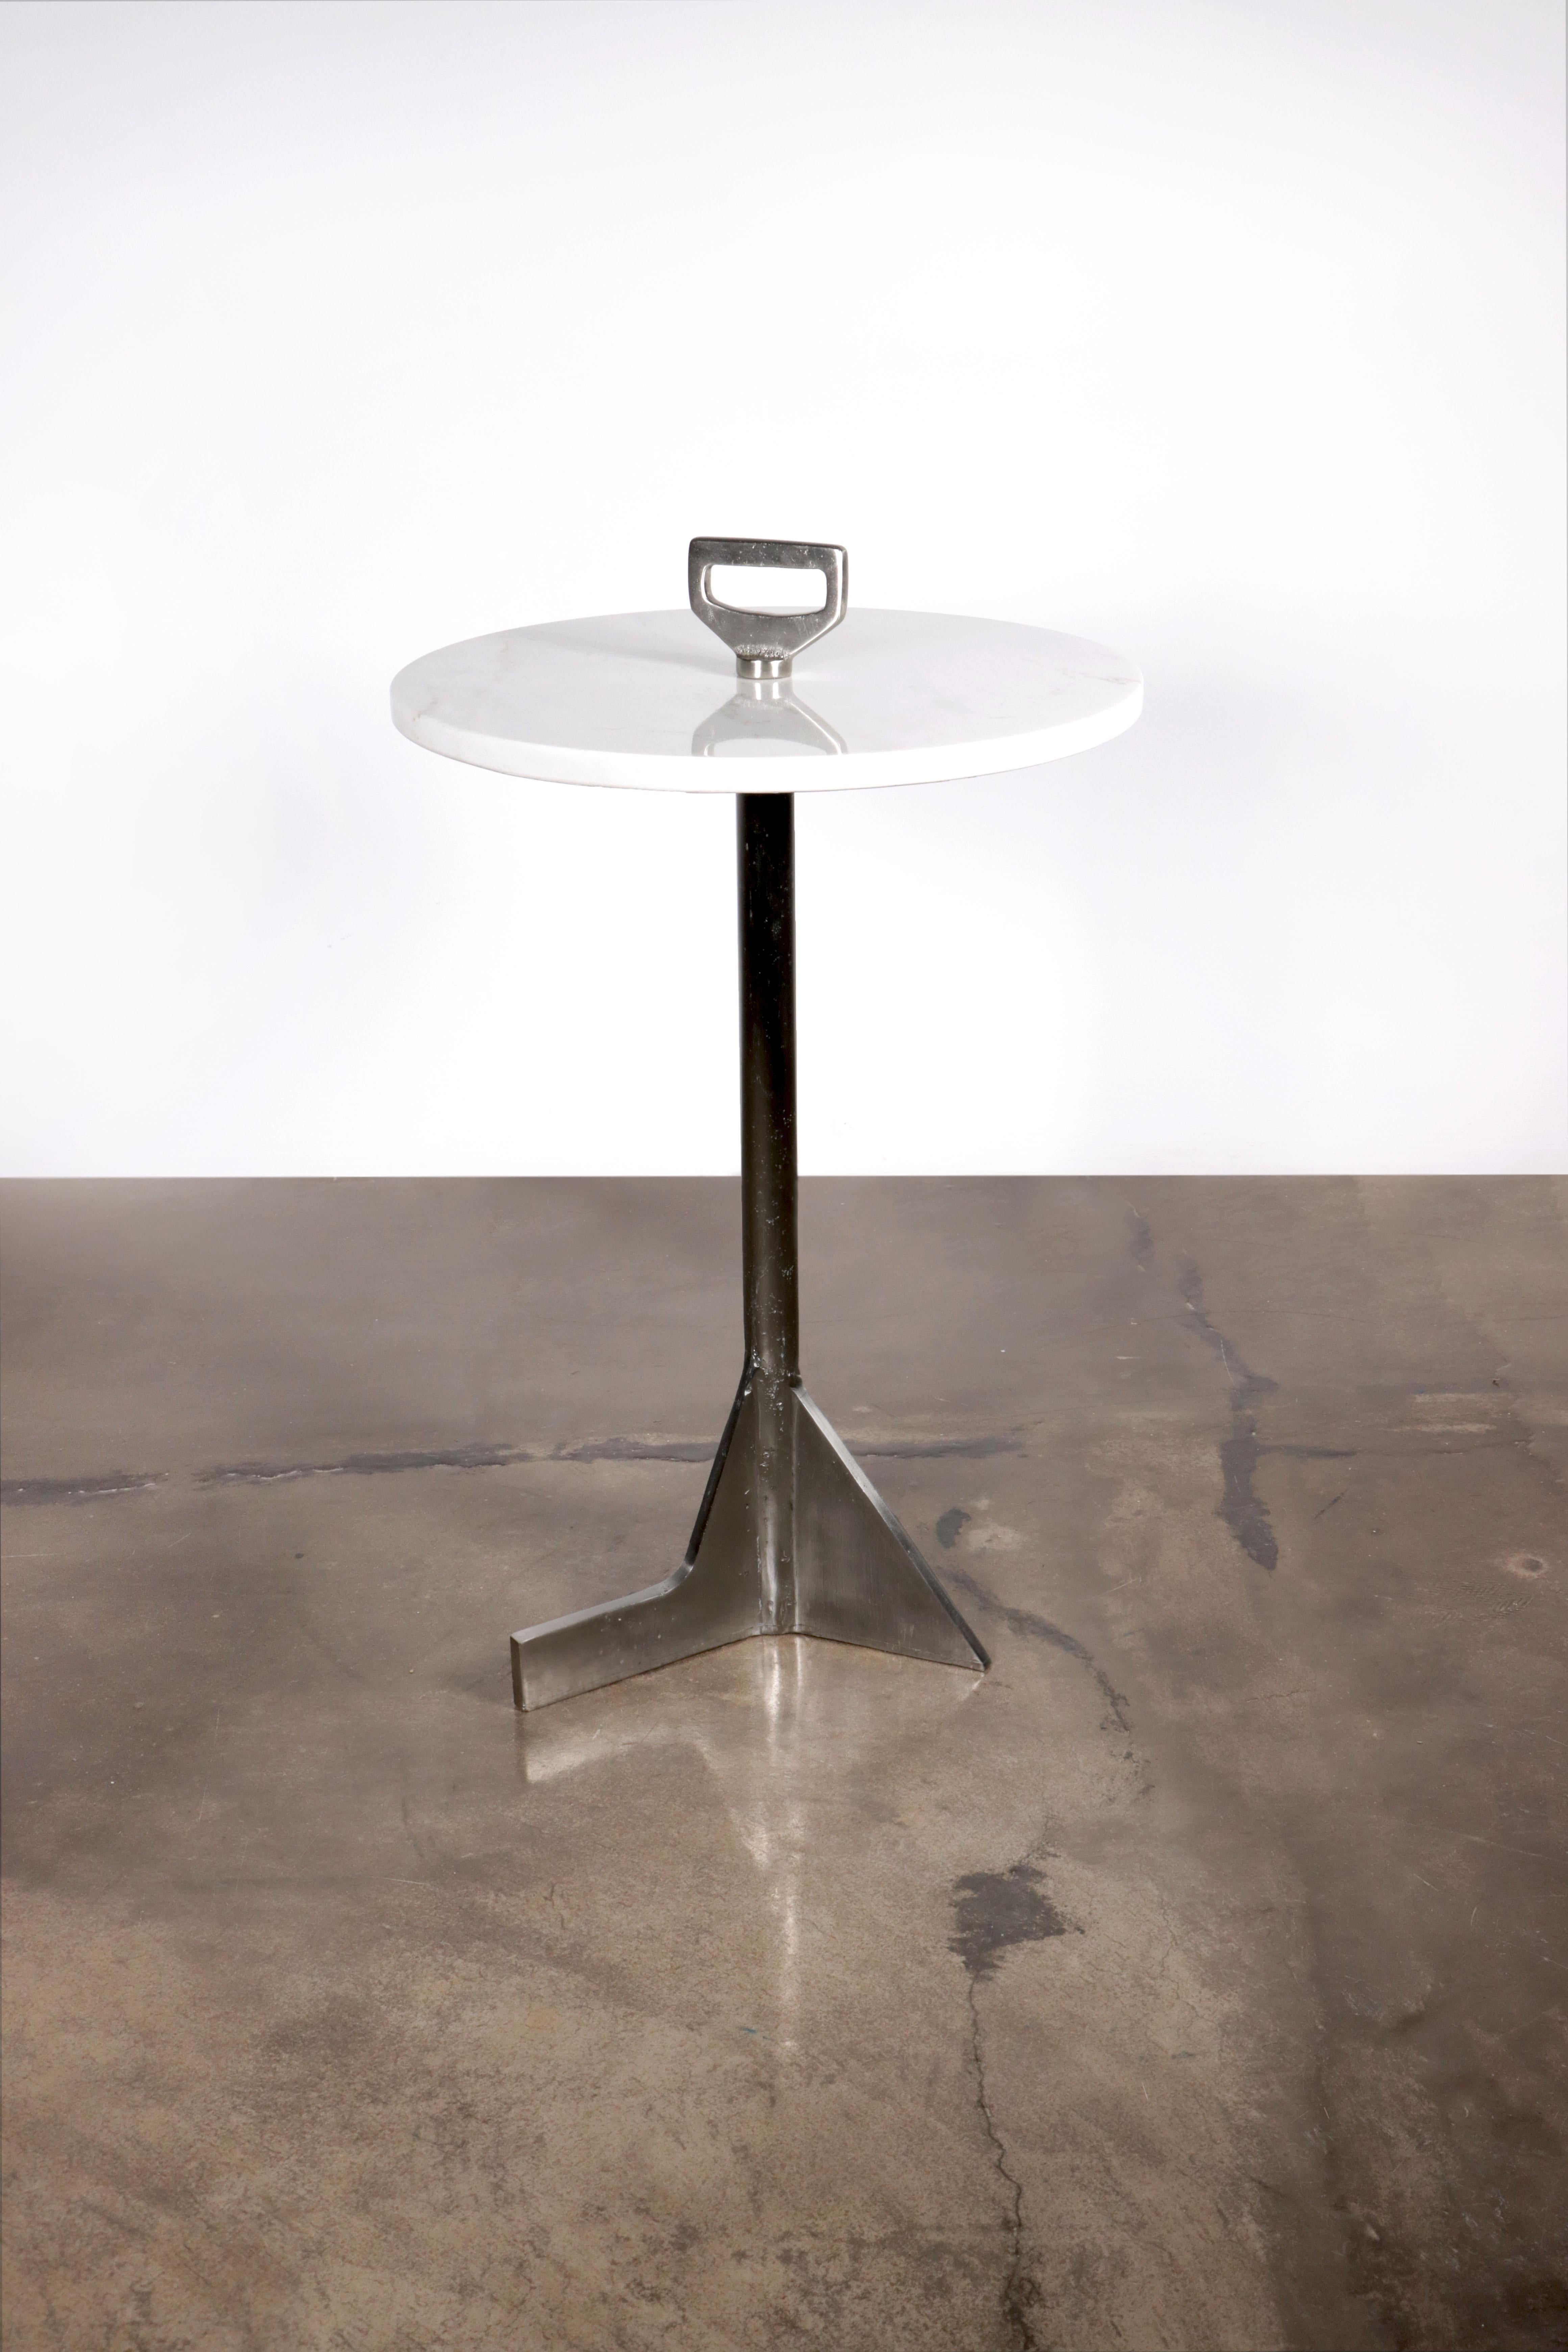 Bellance Marmol Cigarette Table from Costantini in Satin Nickel and White Ibiza

Measures 16